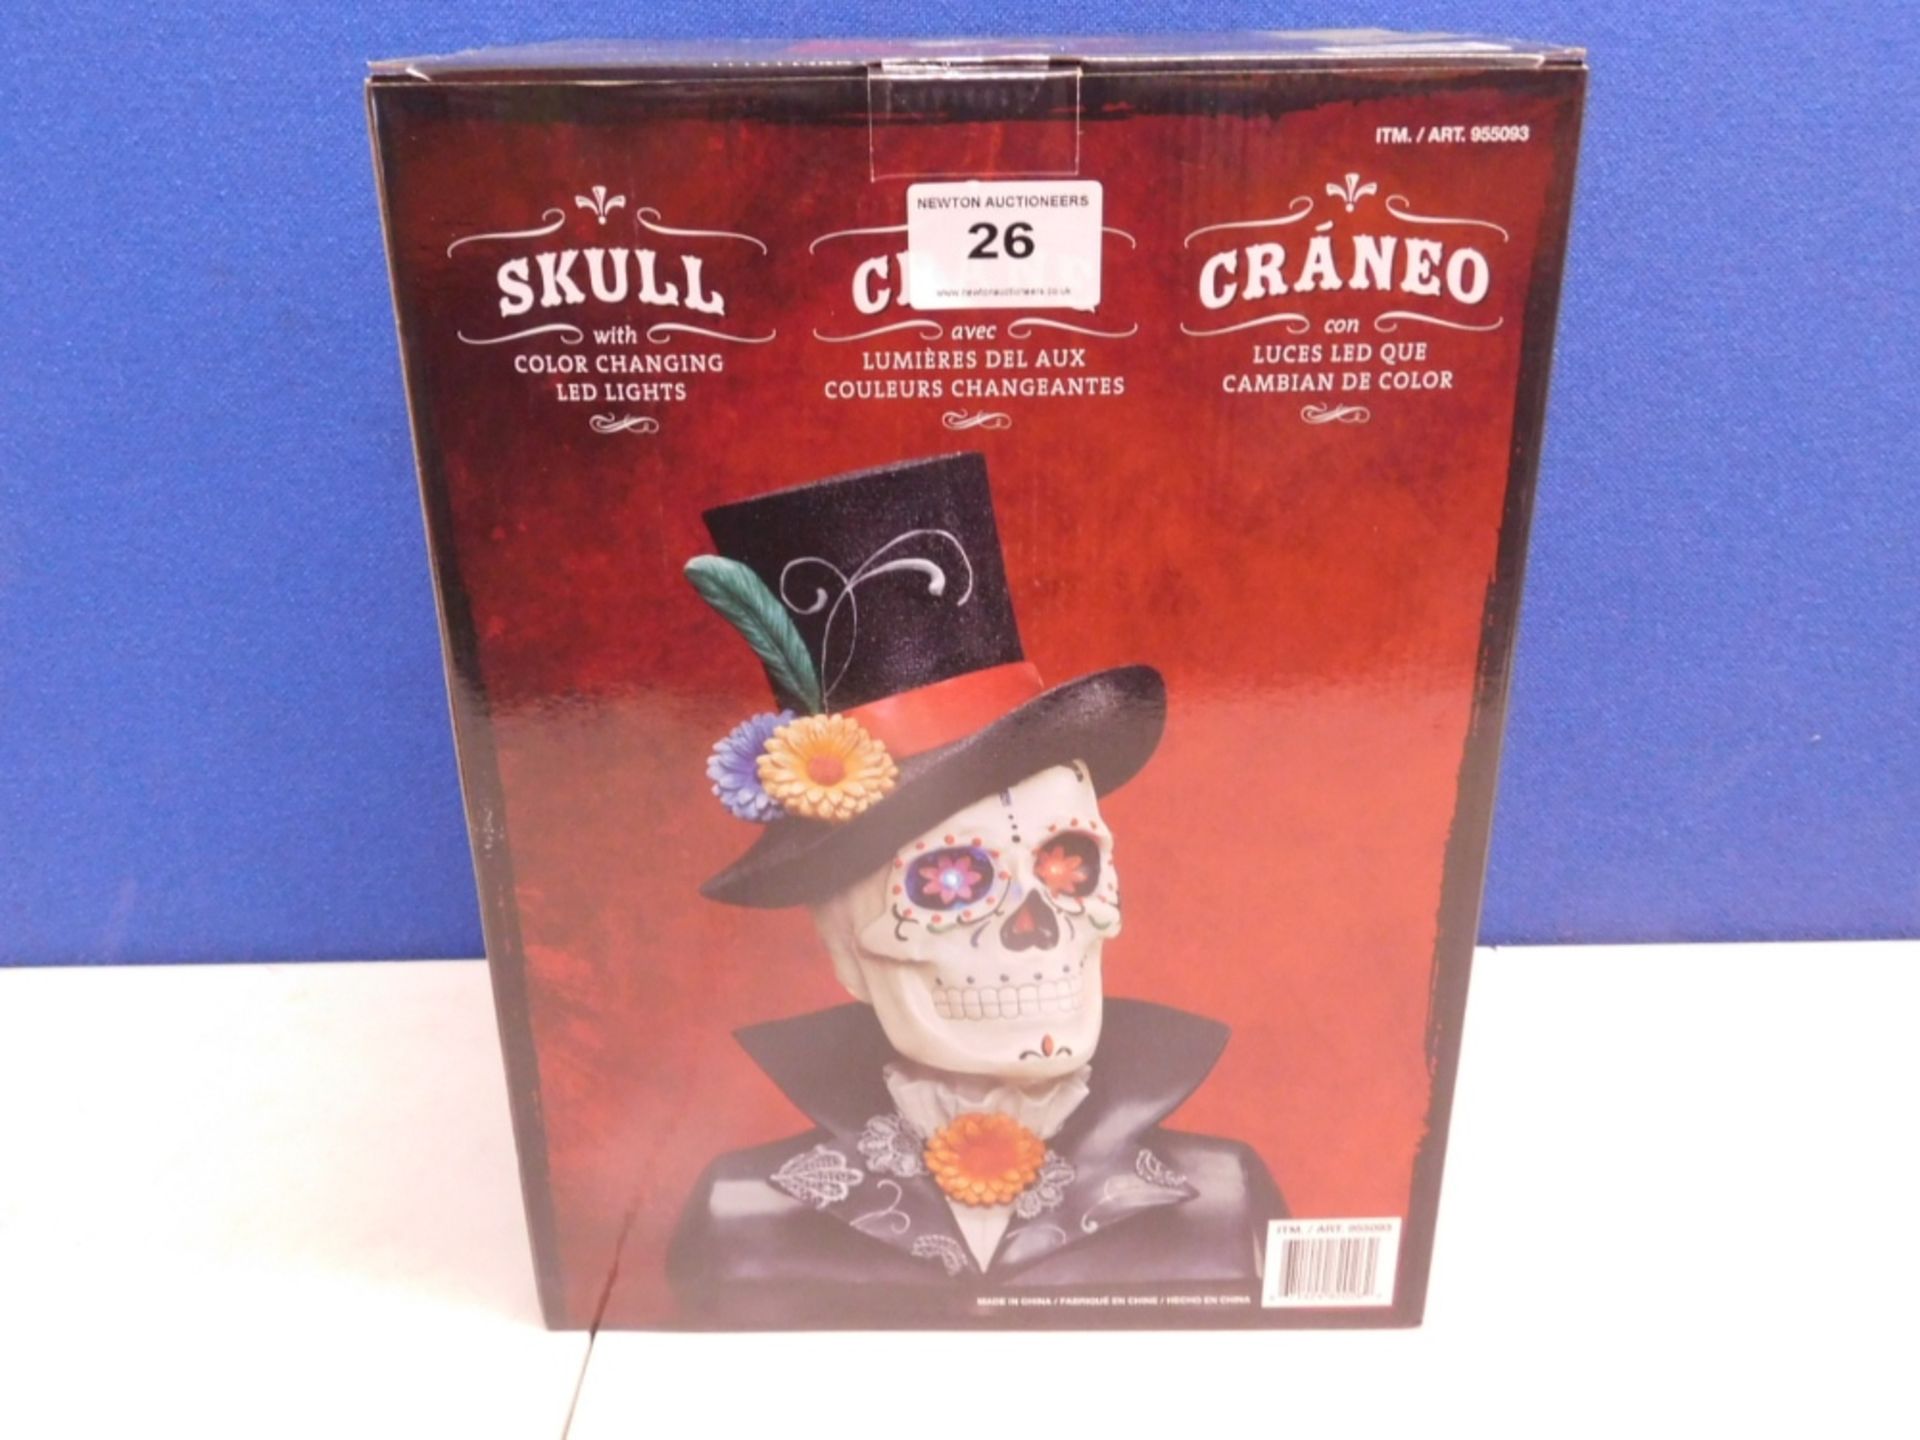 1 BOXED HALLOWEEN CARNIVAL SKULL WITH COLOUR CHANGING LED LIGHTS RRP £39.99